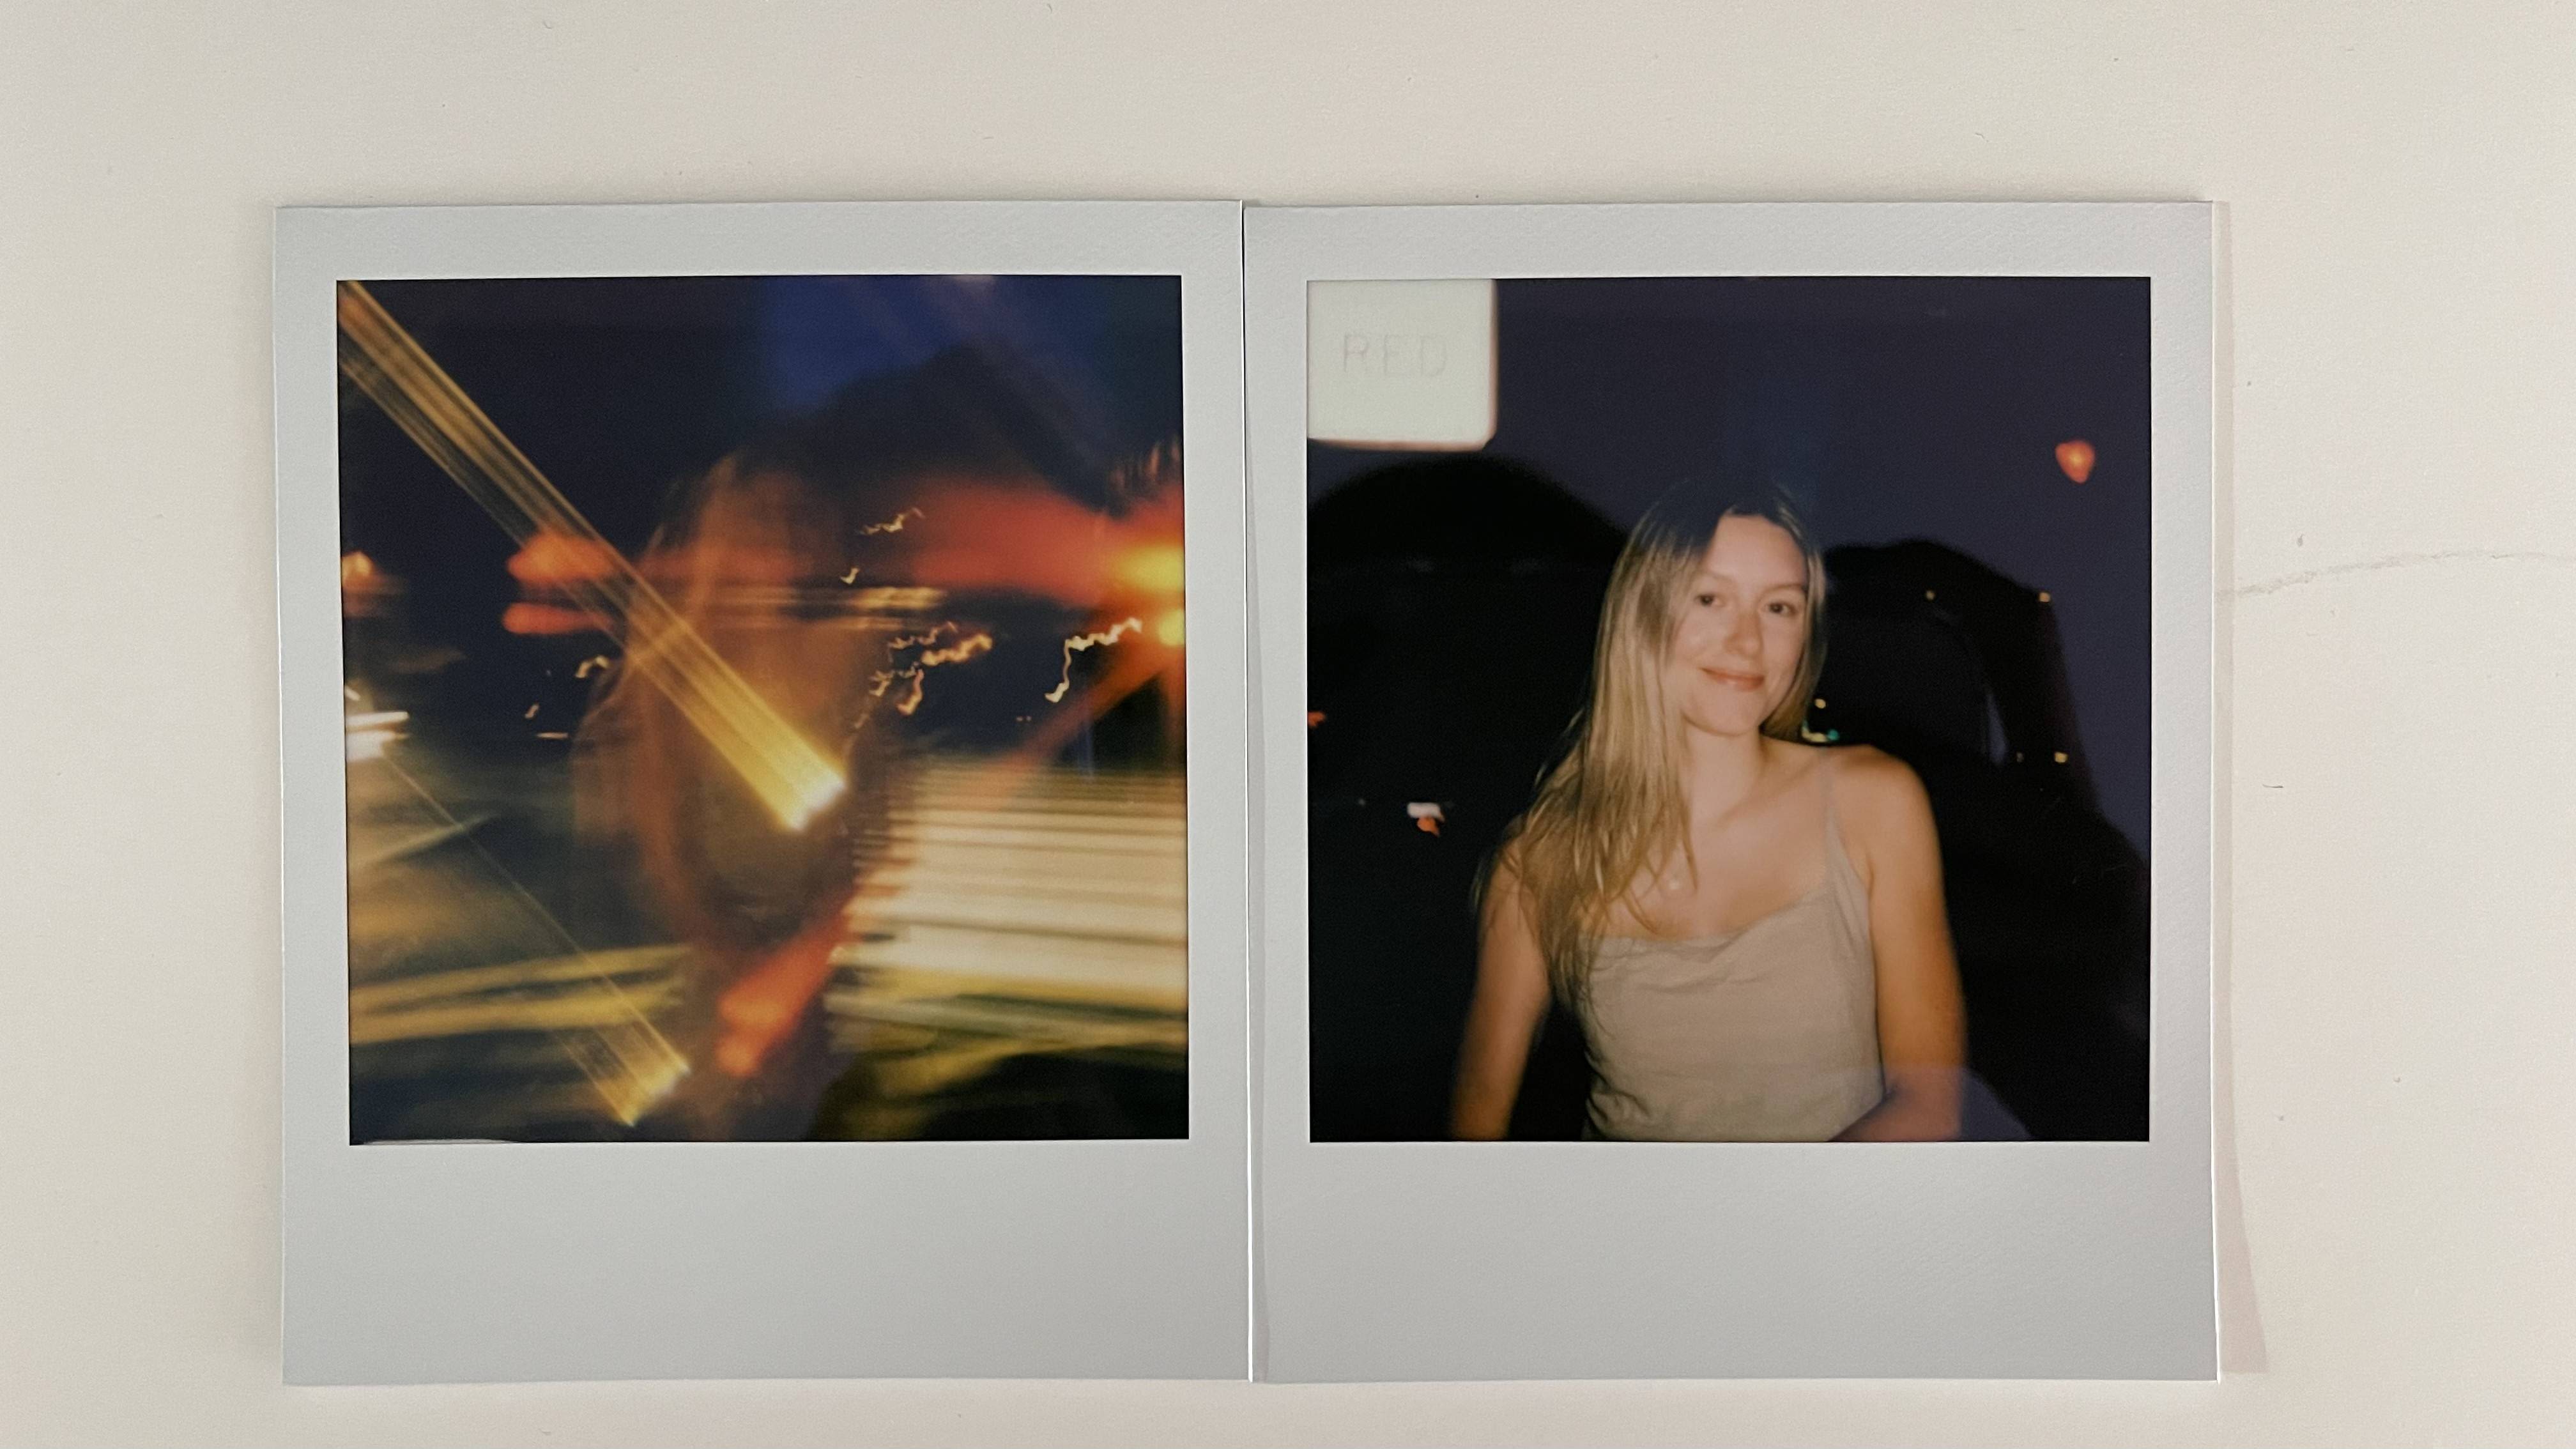 Polaroid Now review: The most accessible instant camera to date